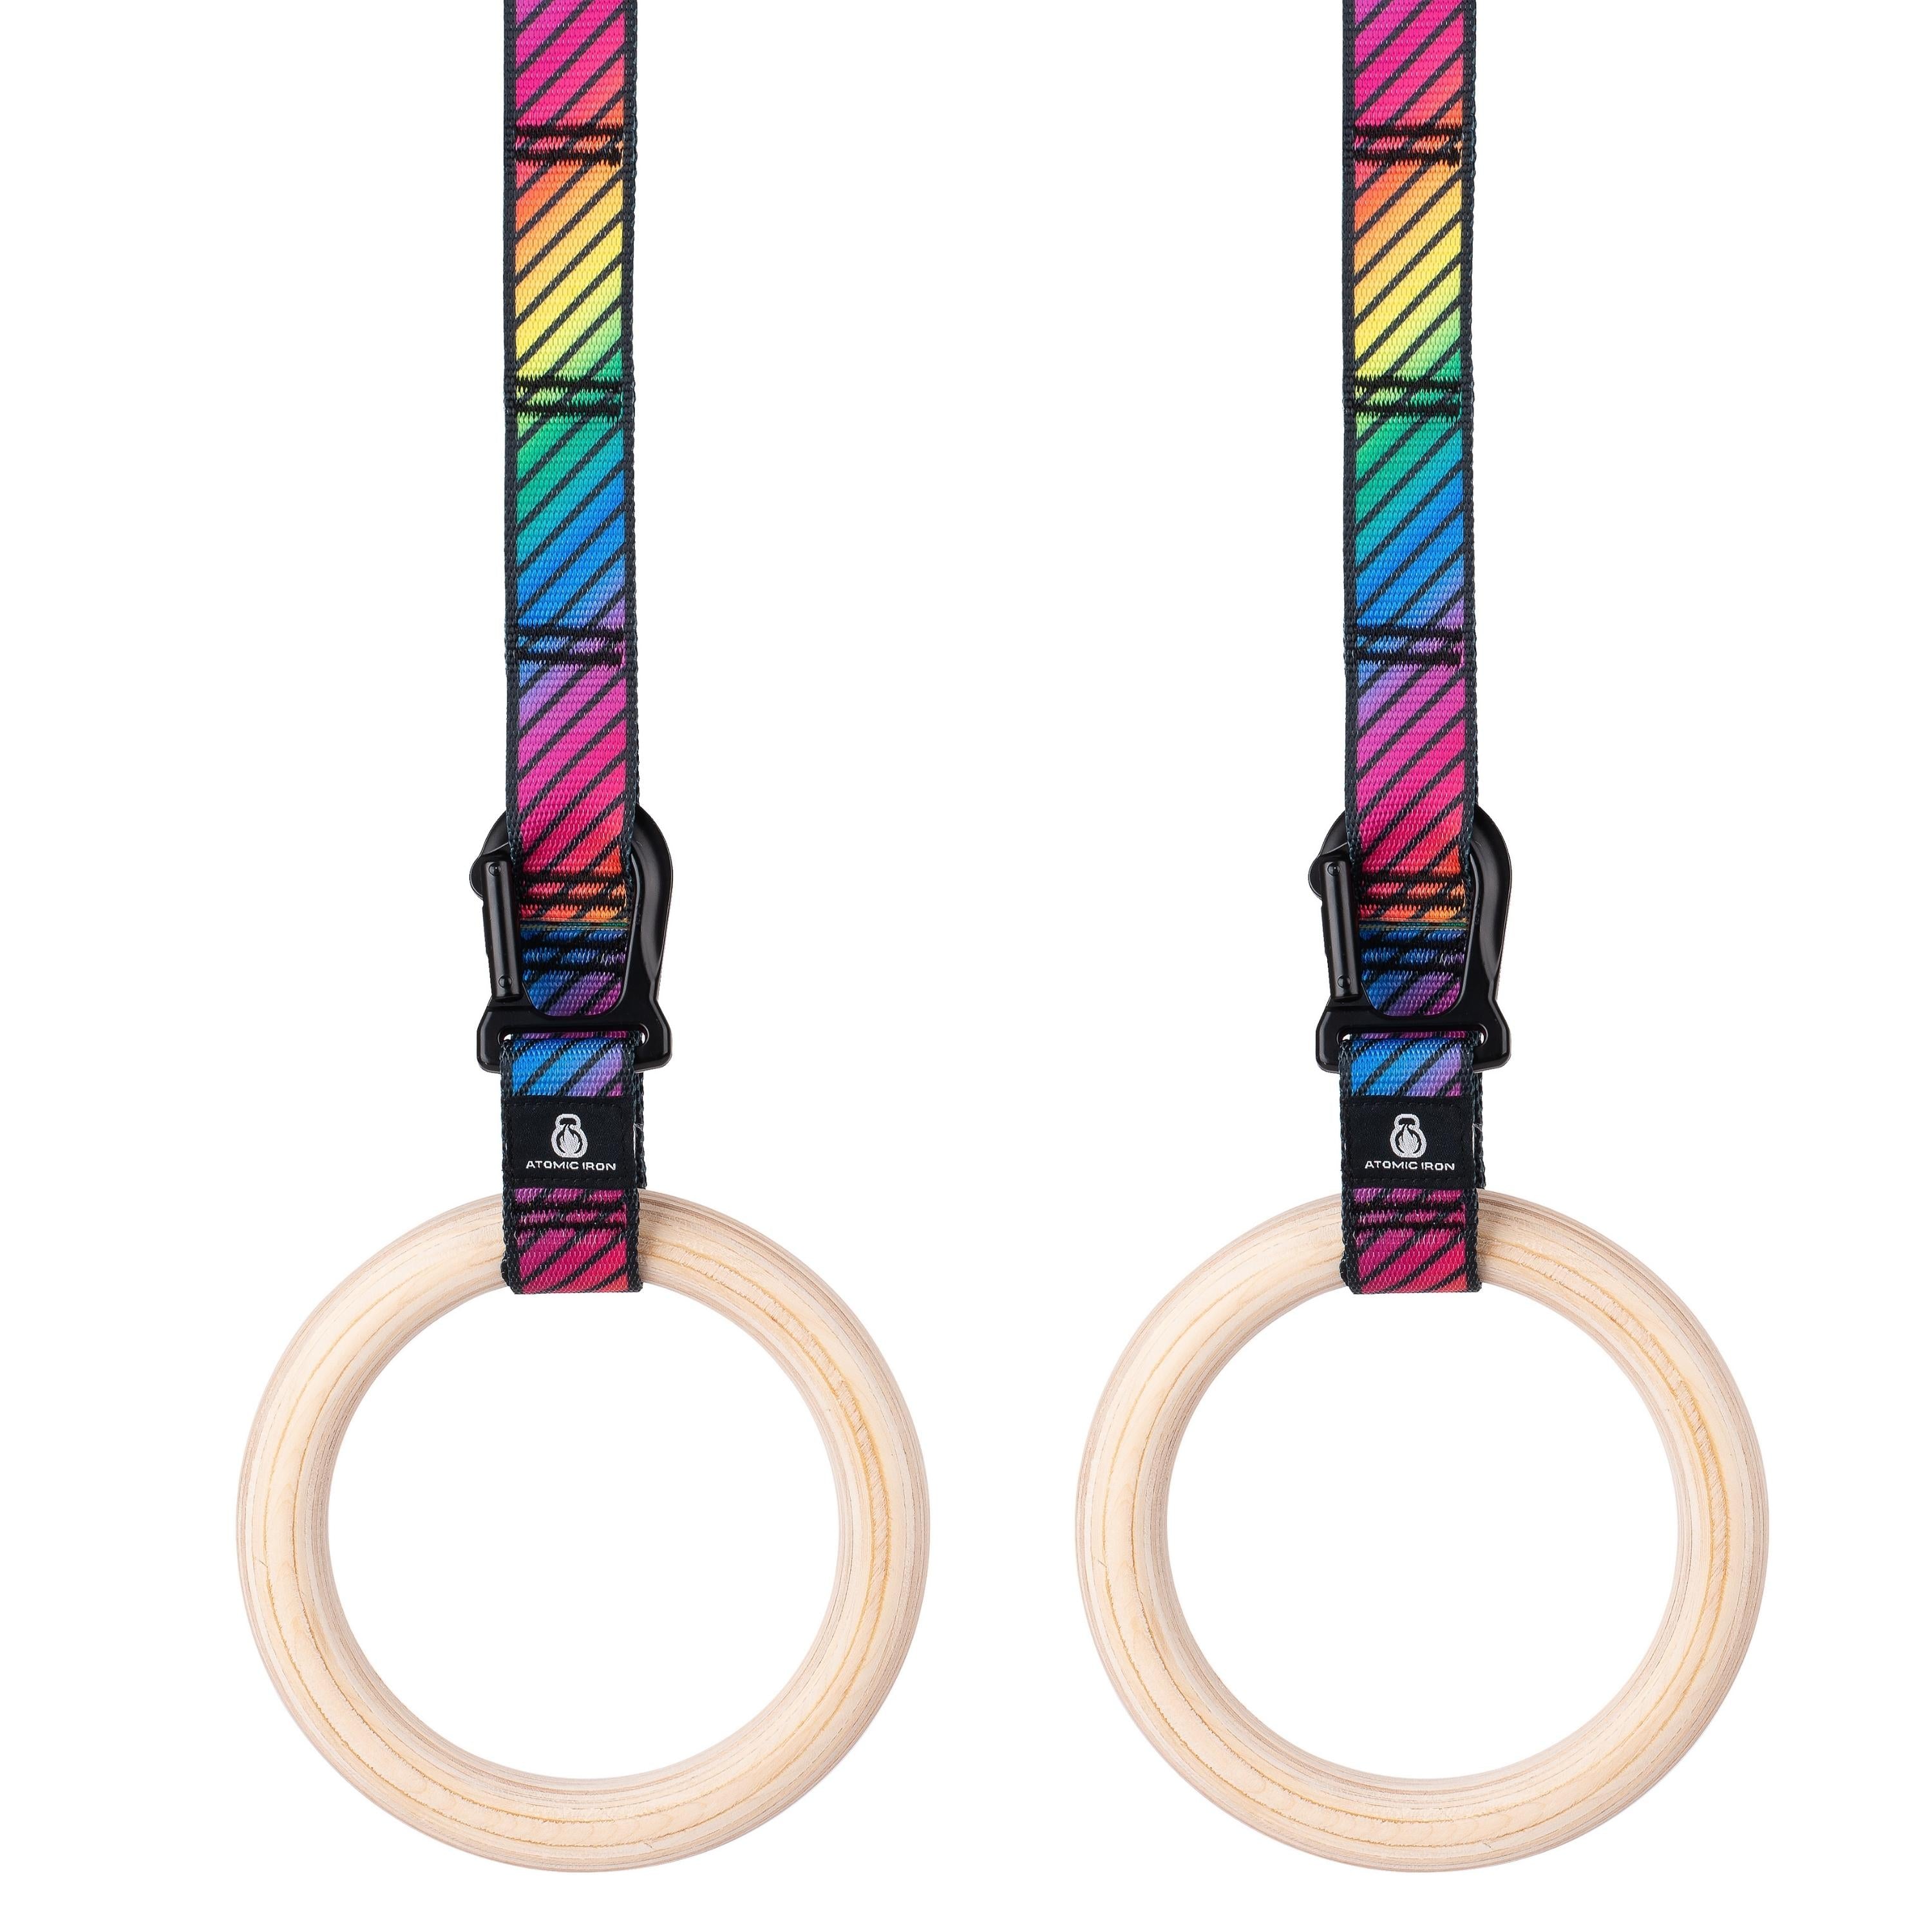 Pair of kids wooden gymnastic rings hanging side by side with colourful rainbow straps - Atomic Iron